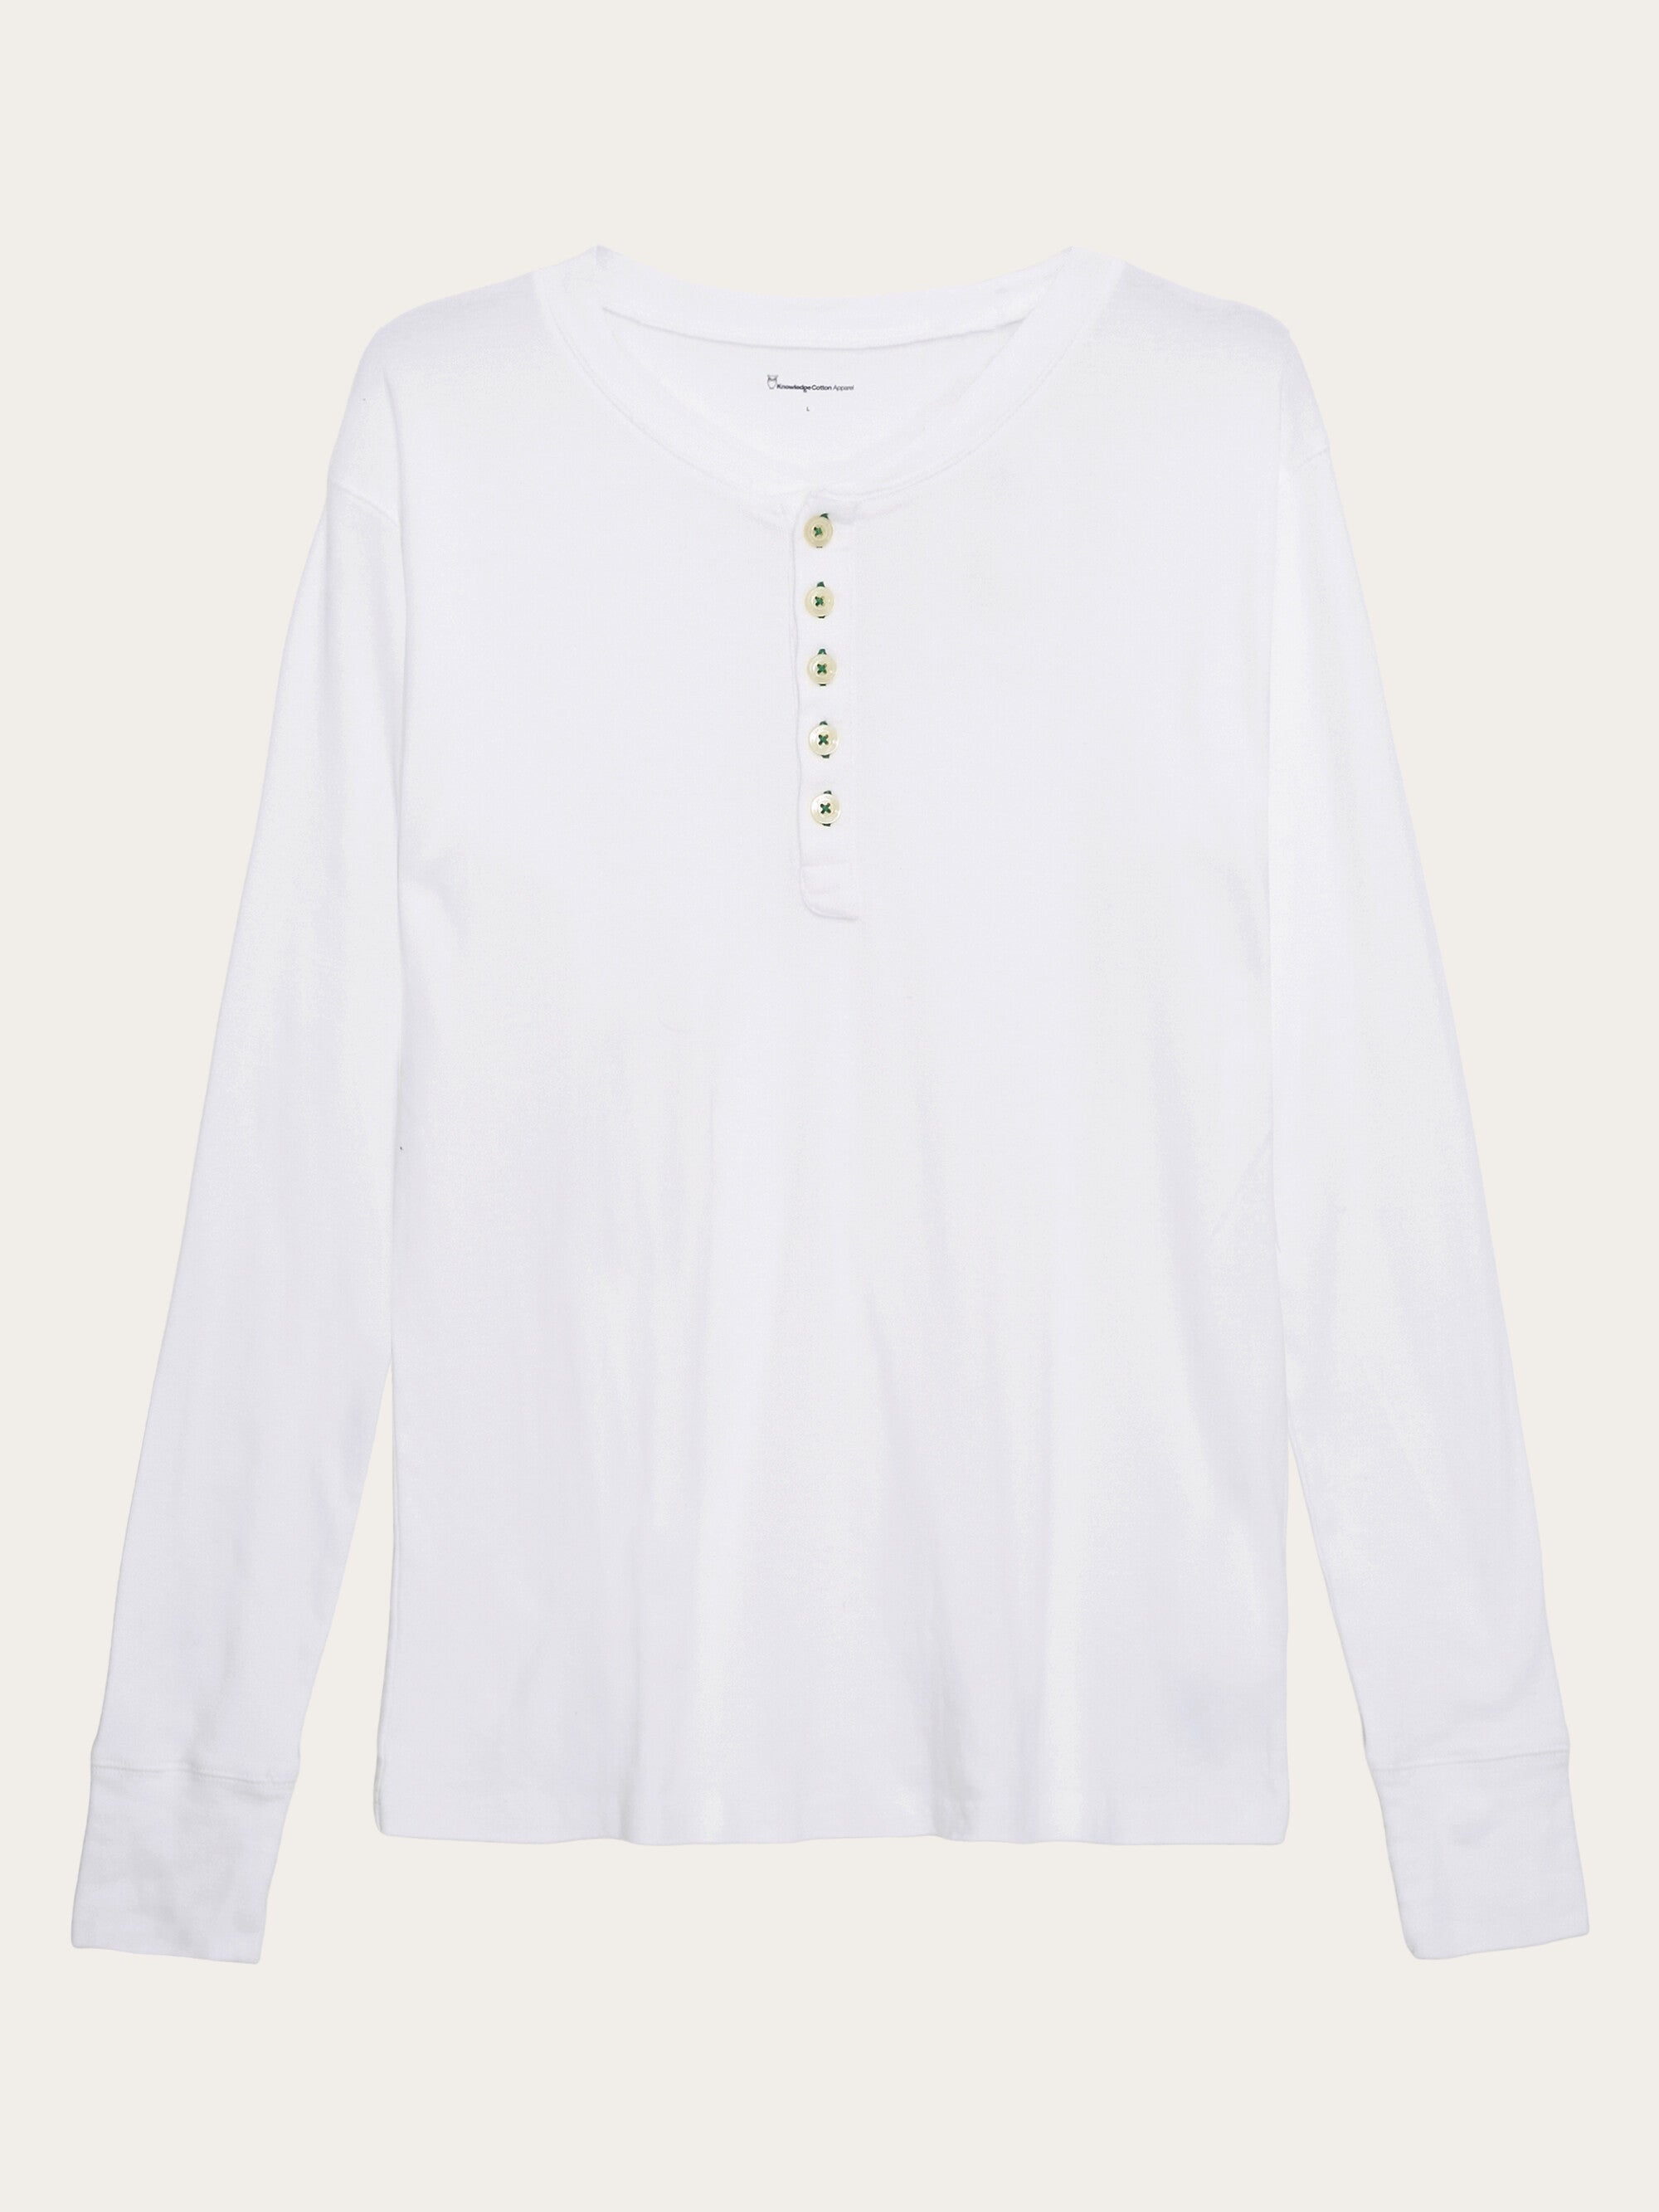 Buy CEDAR LS Henley - Bright White - from KnowledgeCotton Apparel®